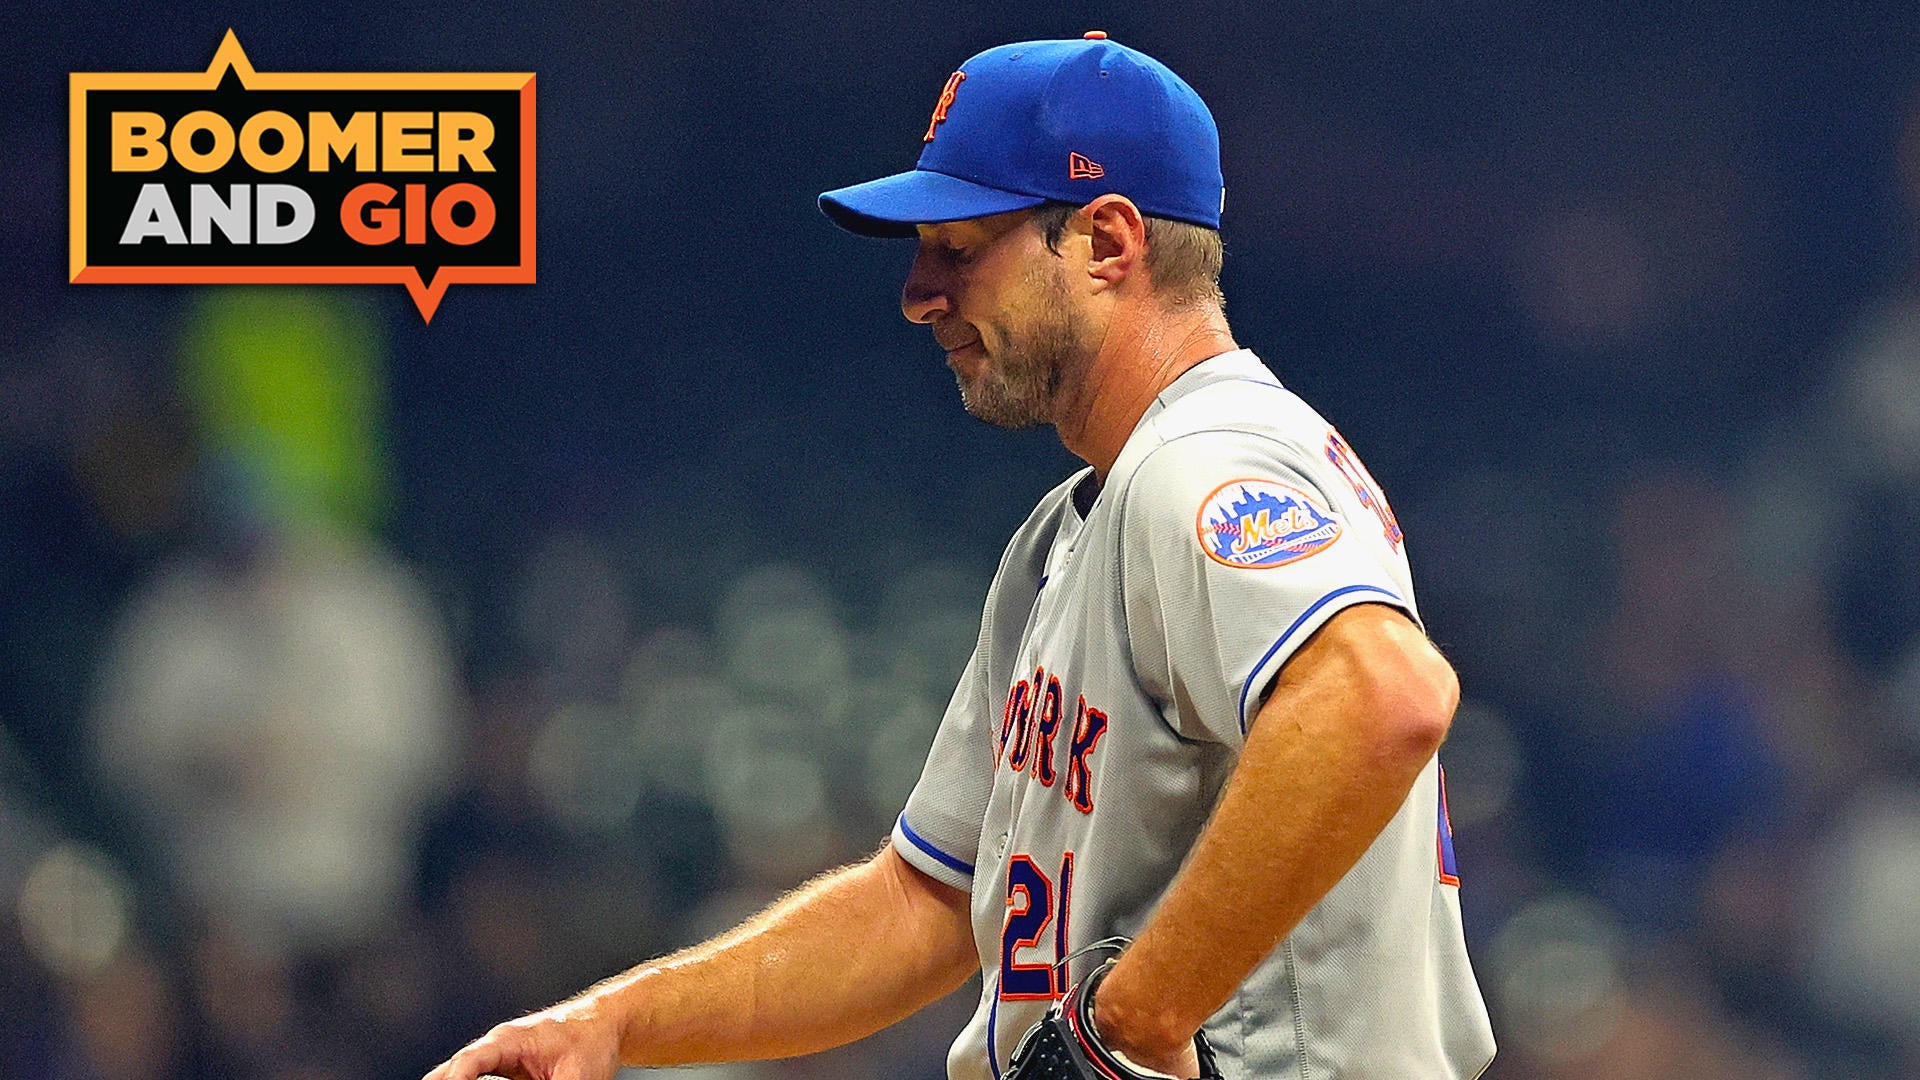 Boomer and Gio: Ron Darling on Whether Max Scherzer's Time Has Come 